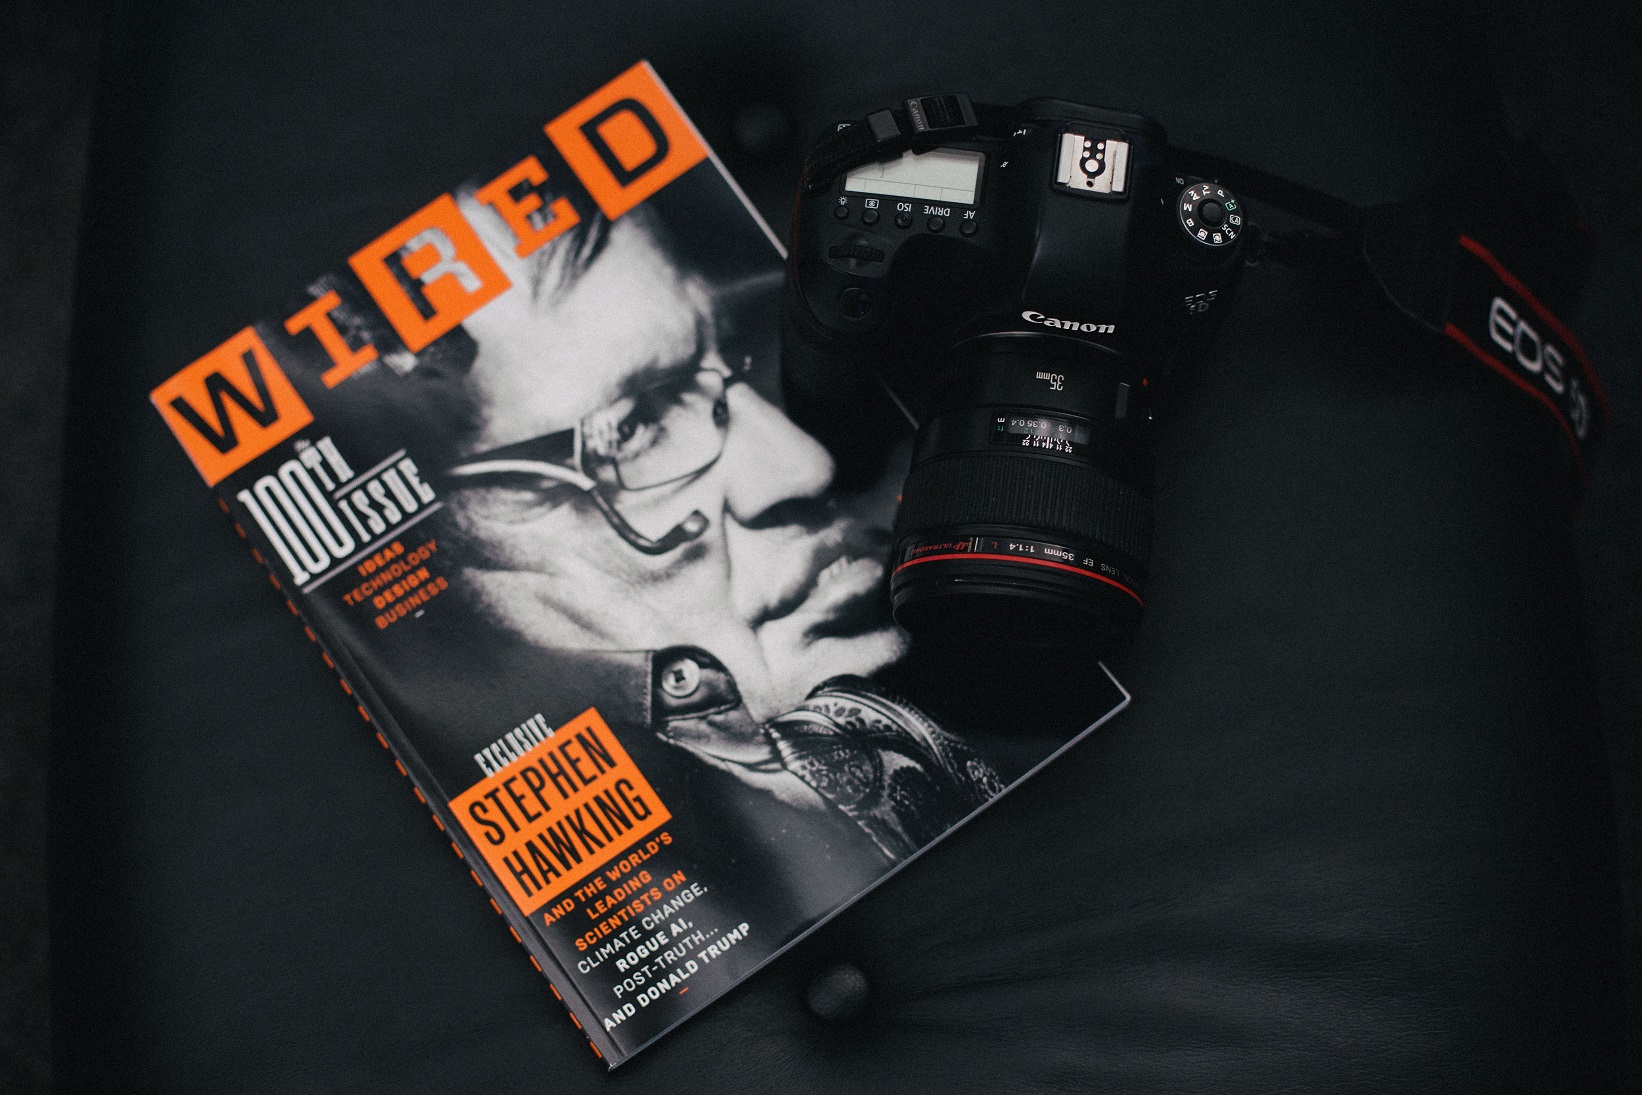 Wired, a magazine with Stephen Hawking on the cover